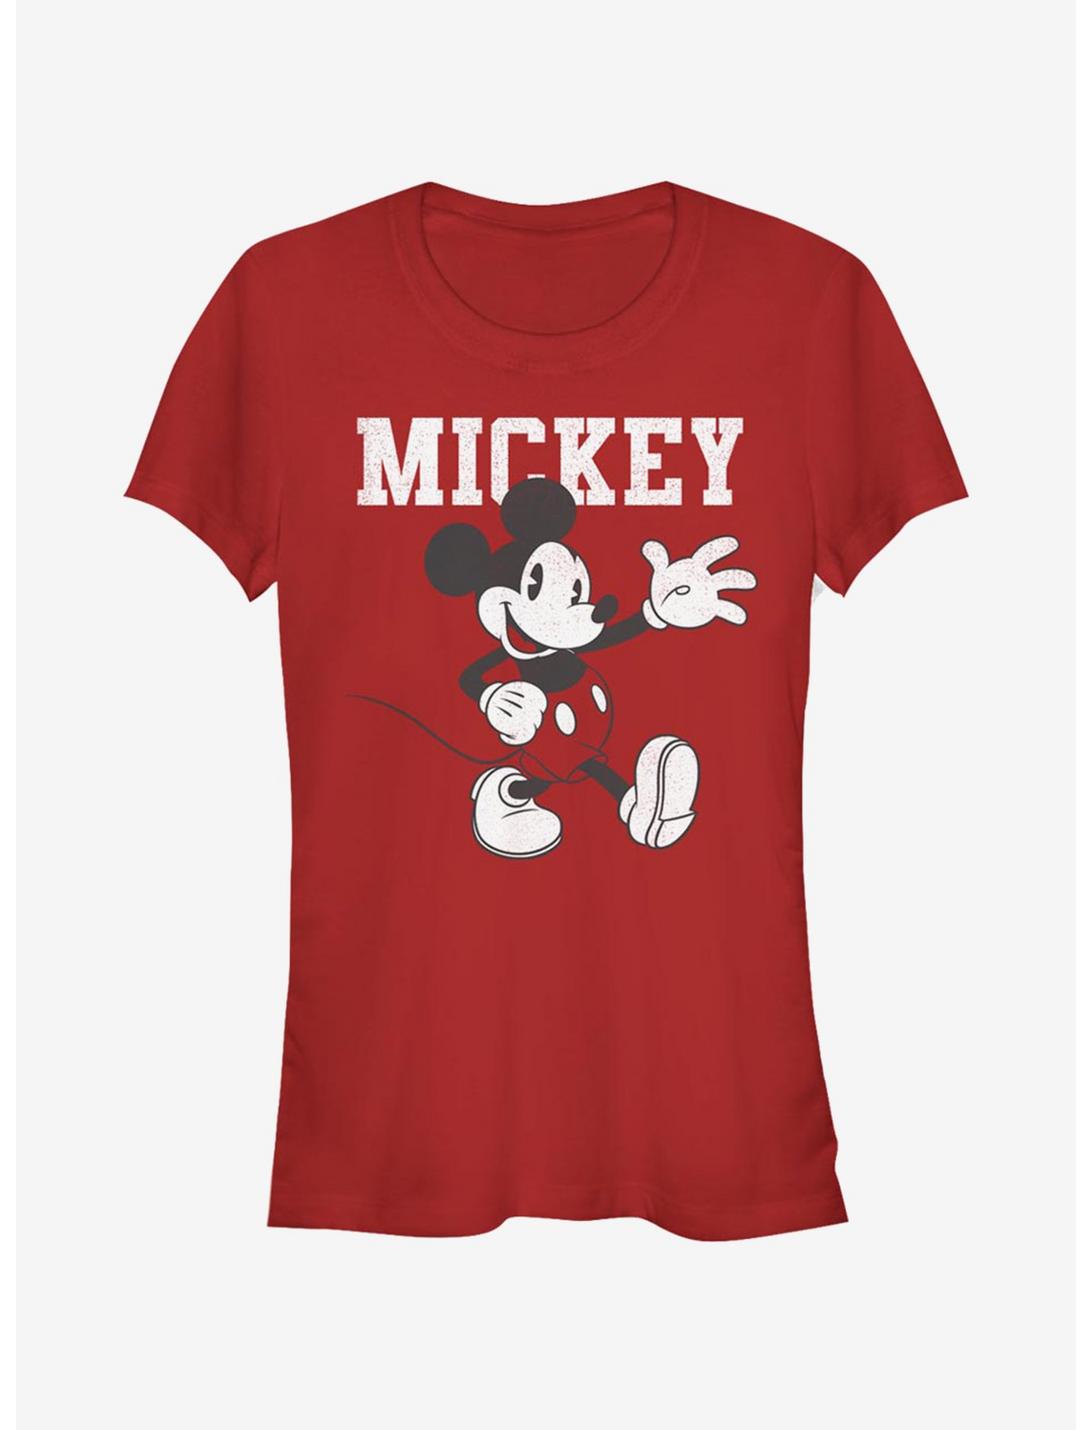 Disney Mickey Mouse Simply Mickey Girls T-Shirt, RED, hi-res